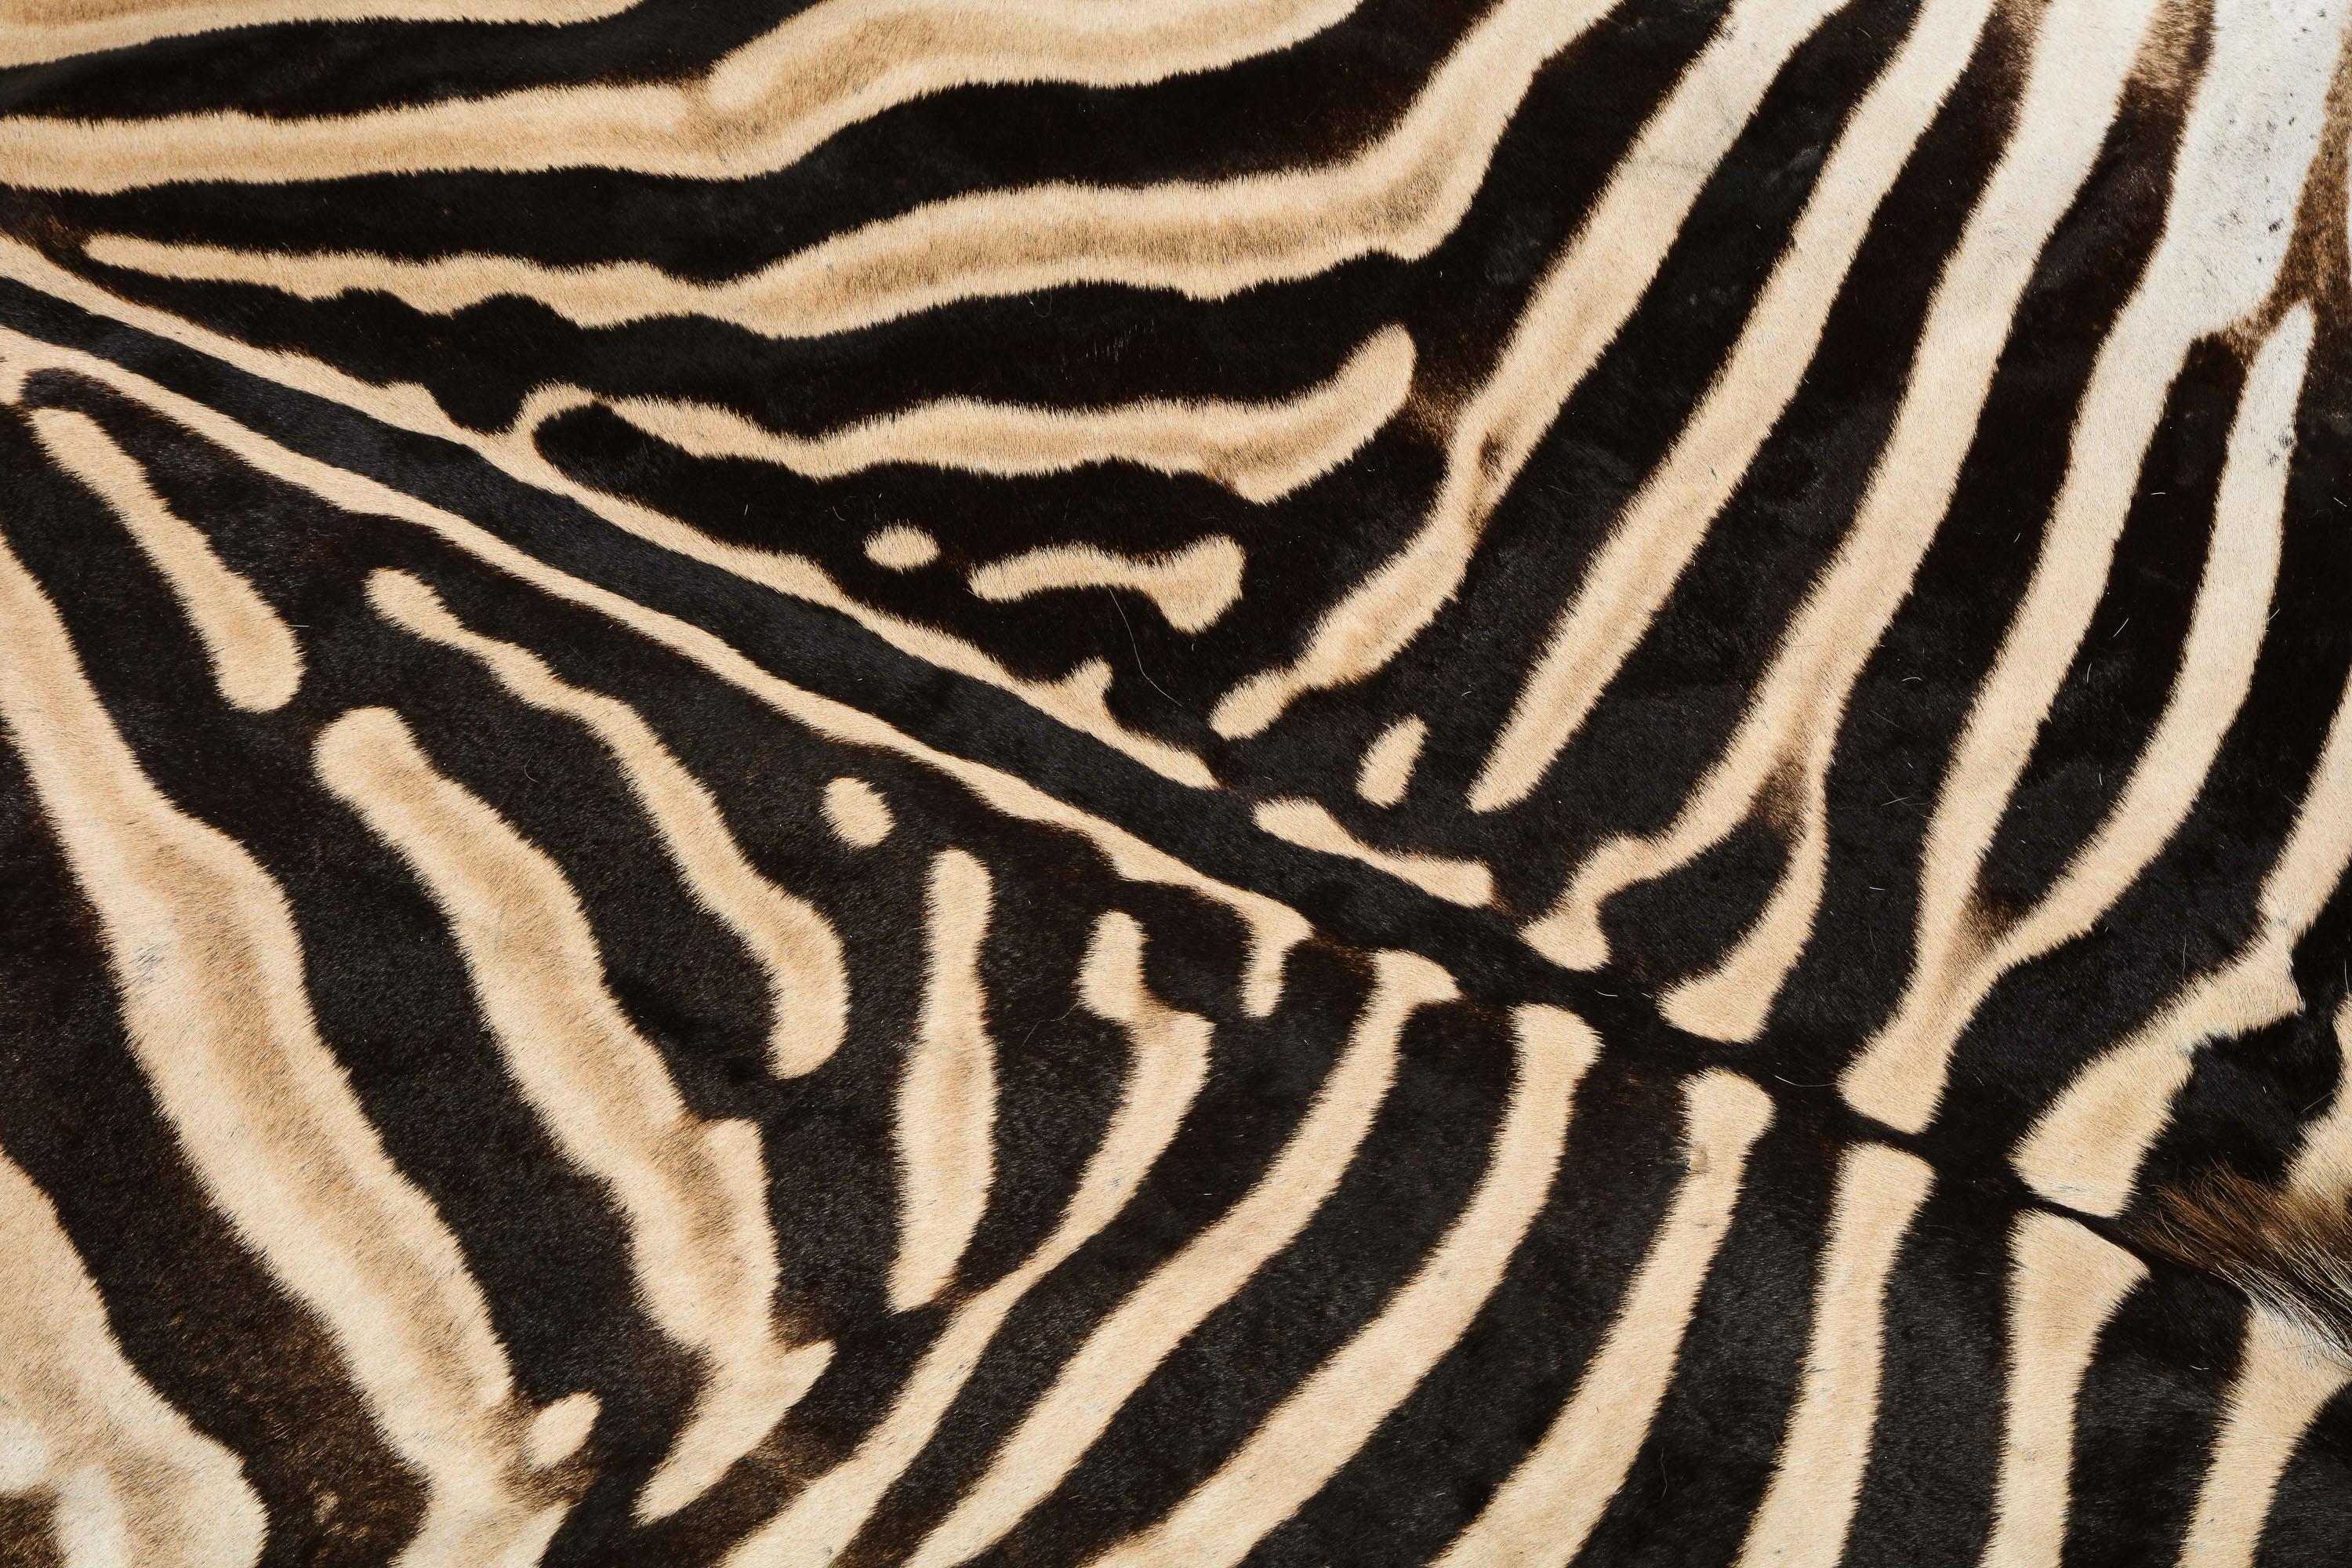 South African Zebra Rug, South Africa, Wool Felt Backed with Leather Trim, In Stock, New Hide For Sale